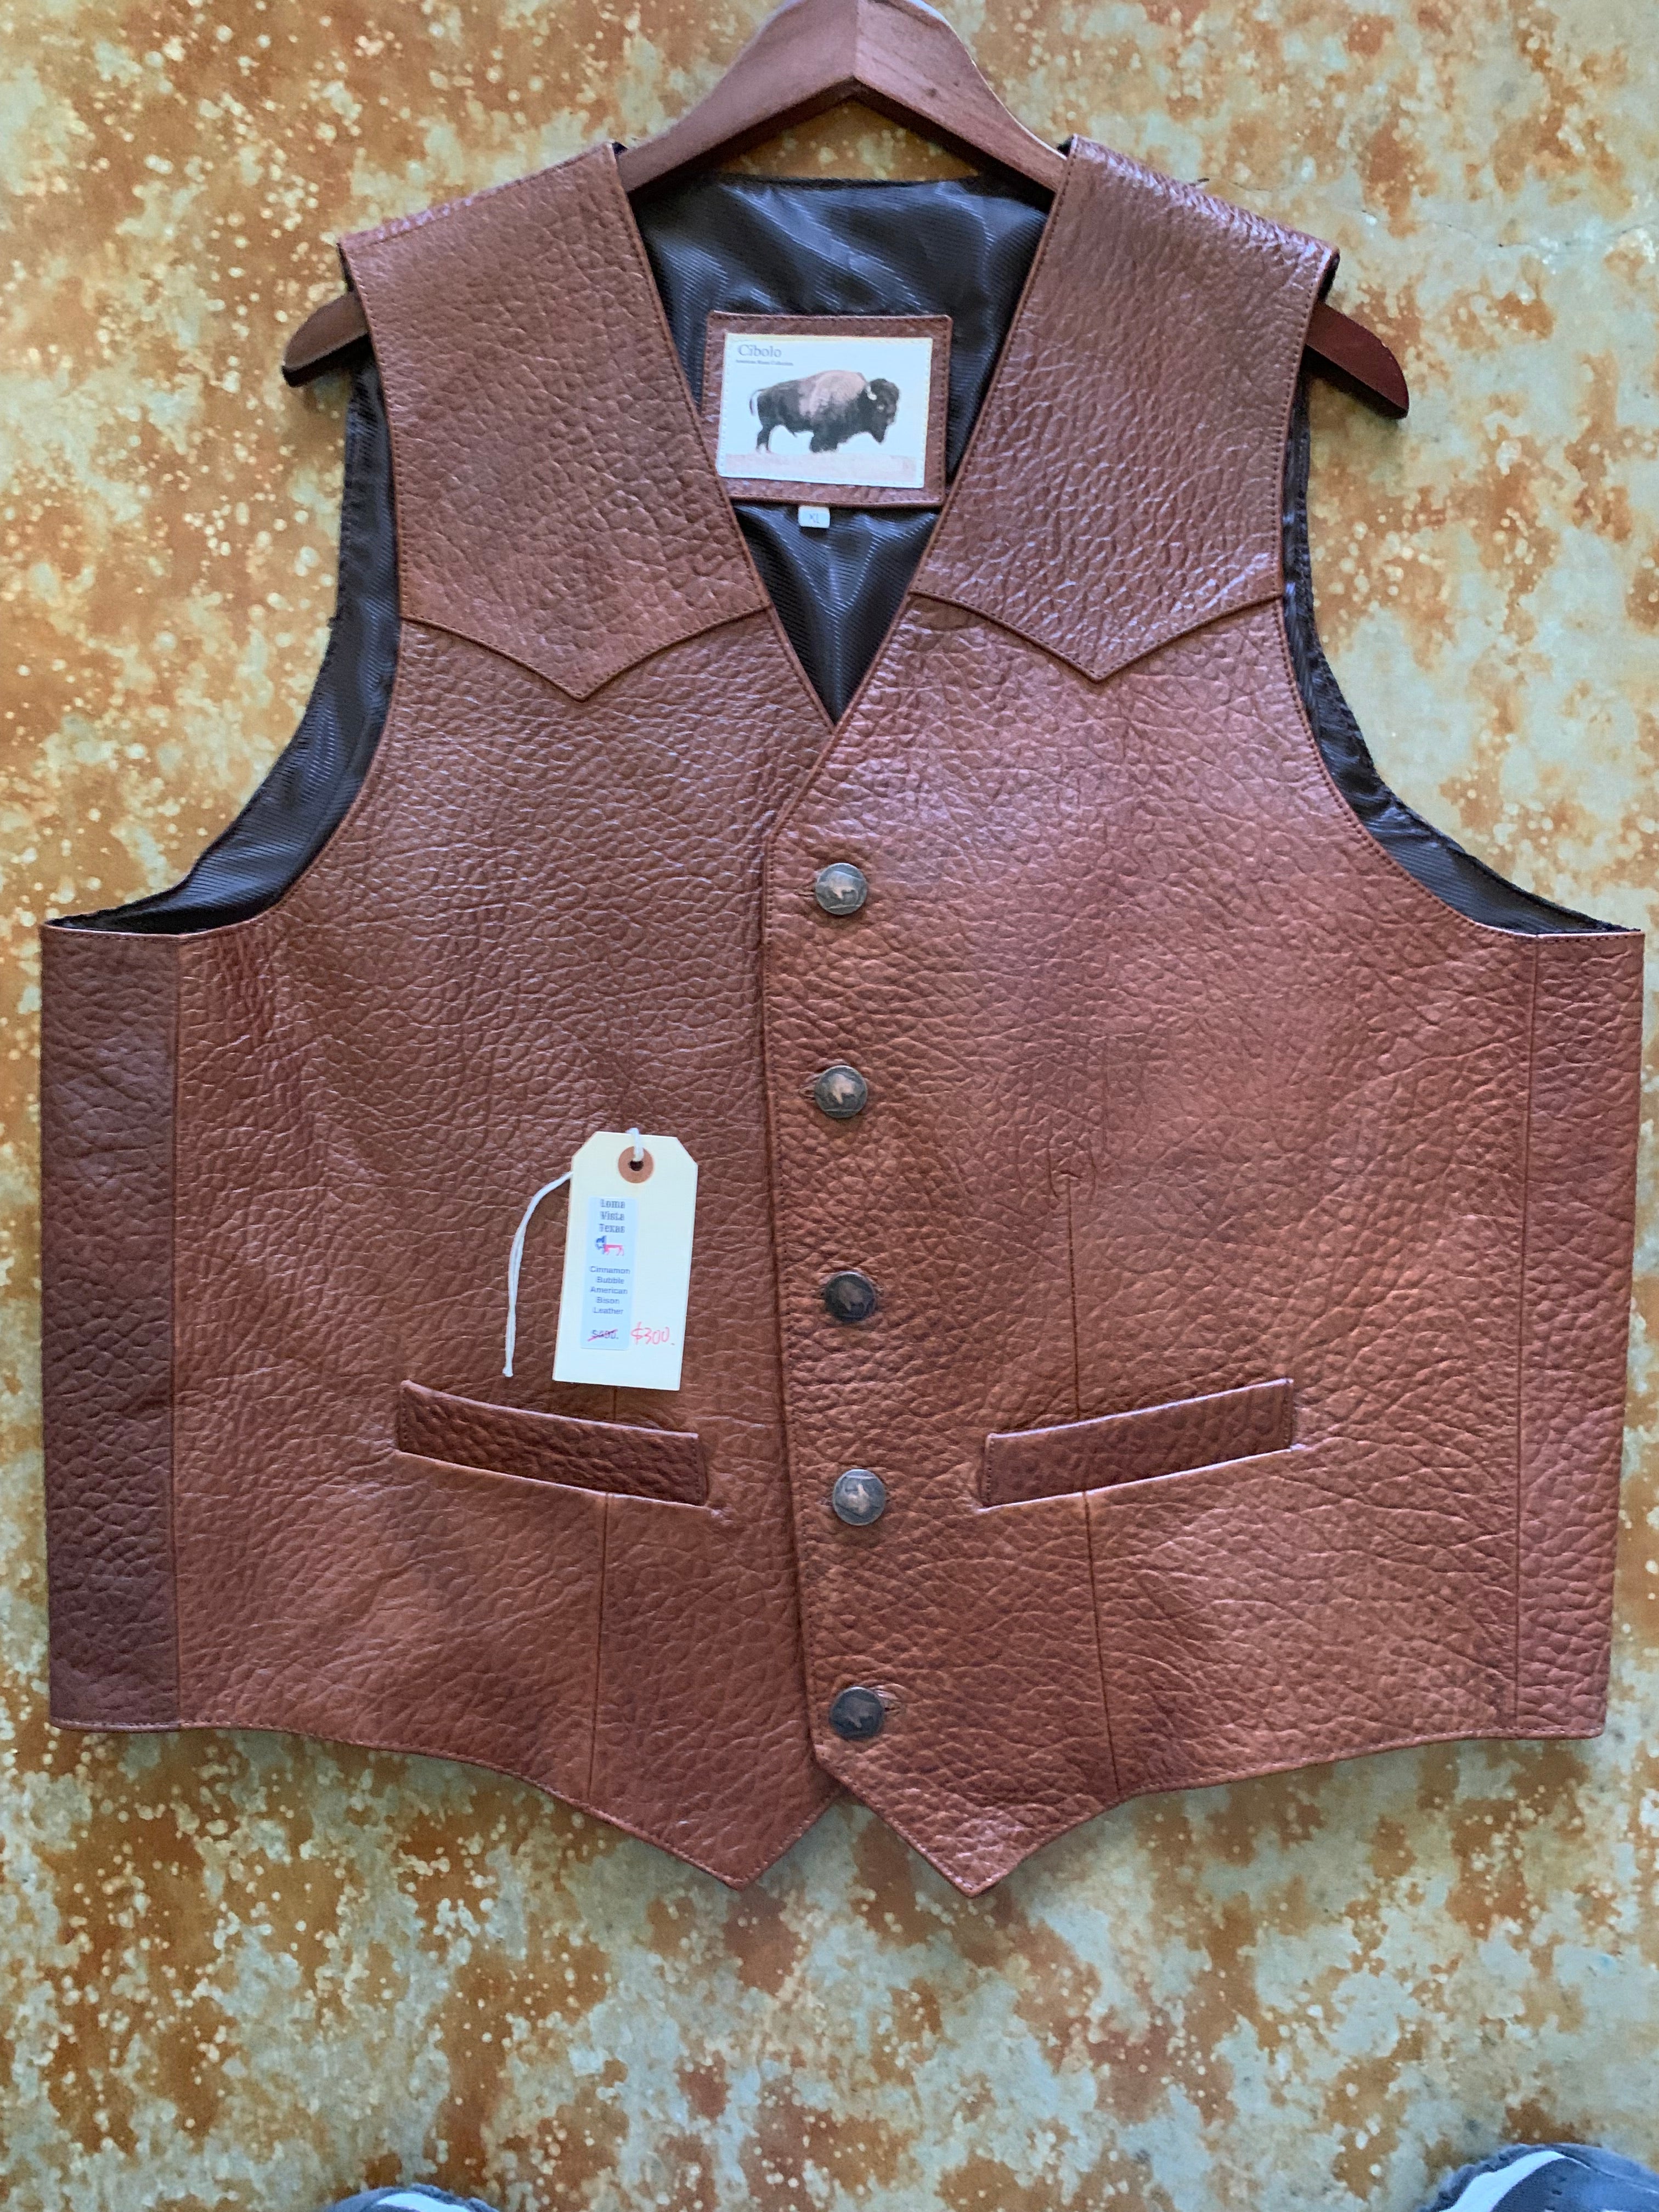 Loma Vista Bison Leather - XL.  "Cinnamon Bubble" finish with an "oops" or 2